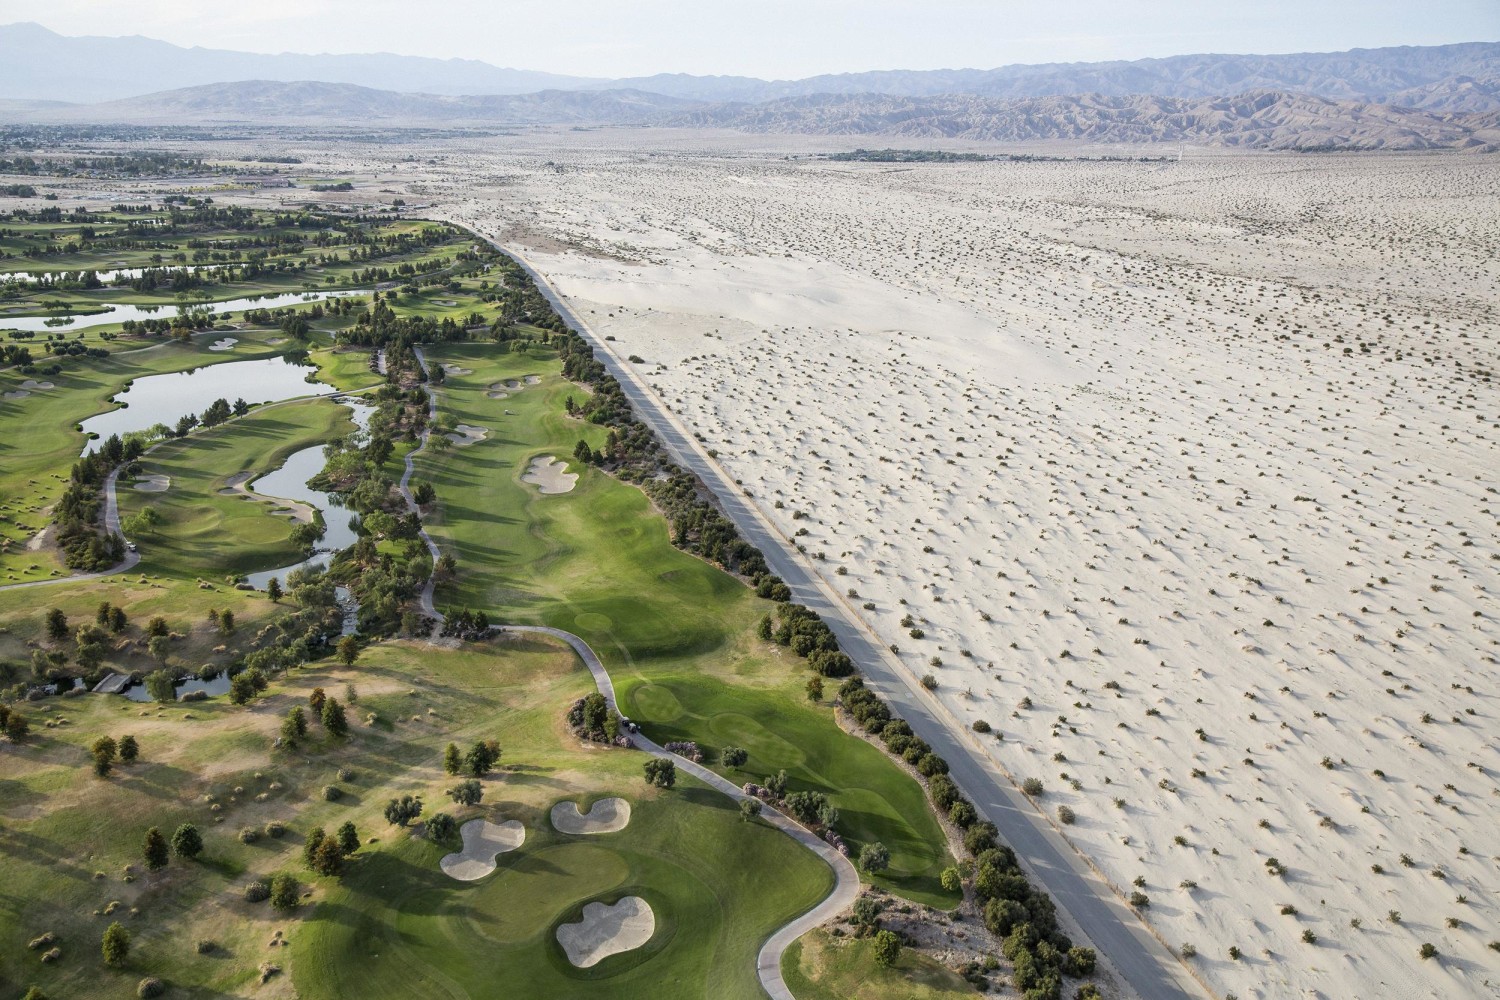 In Palm Springs, America's 'Oasis' Grapples With Drought